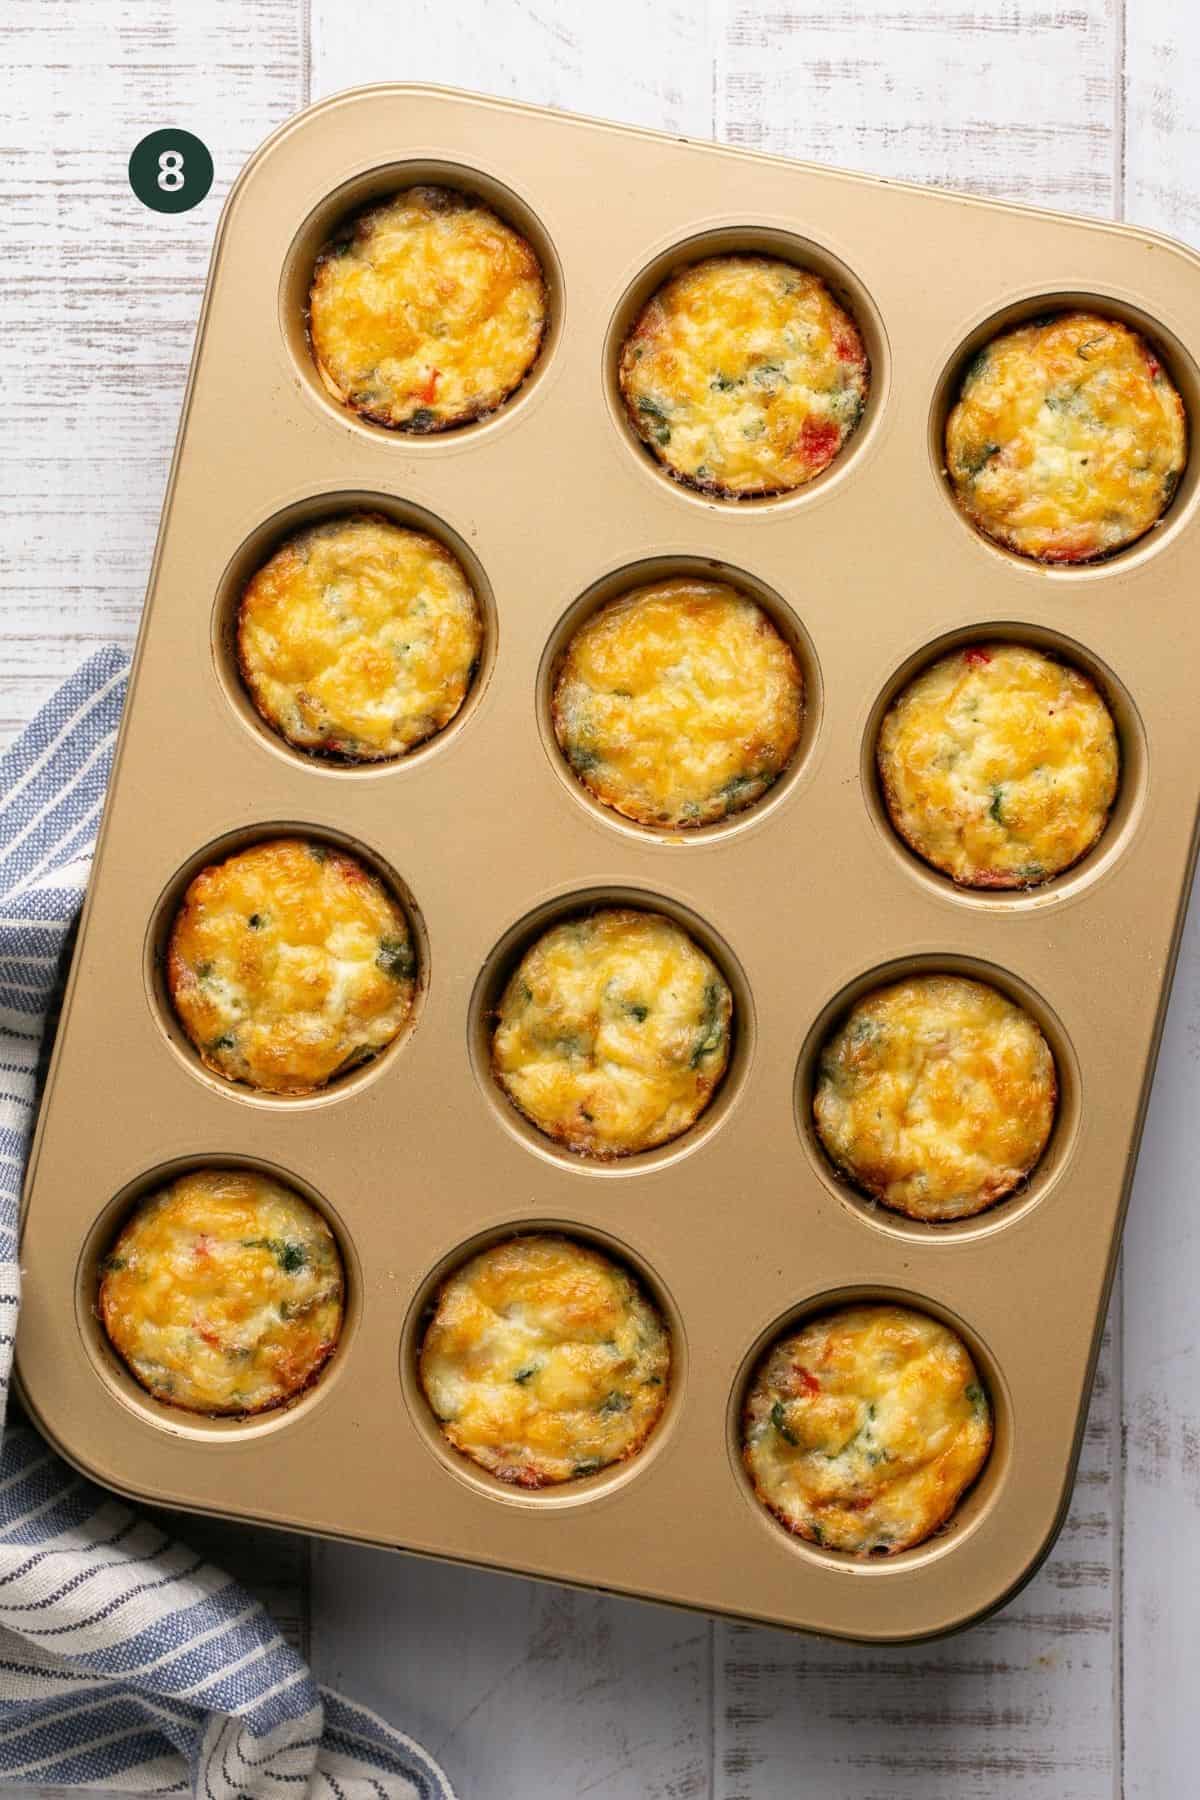 Fully baked egg bites in a muffin tin.